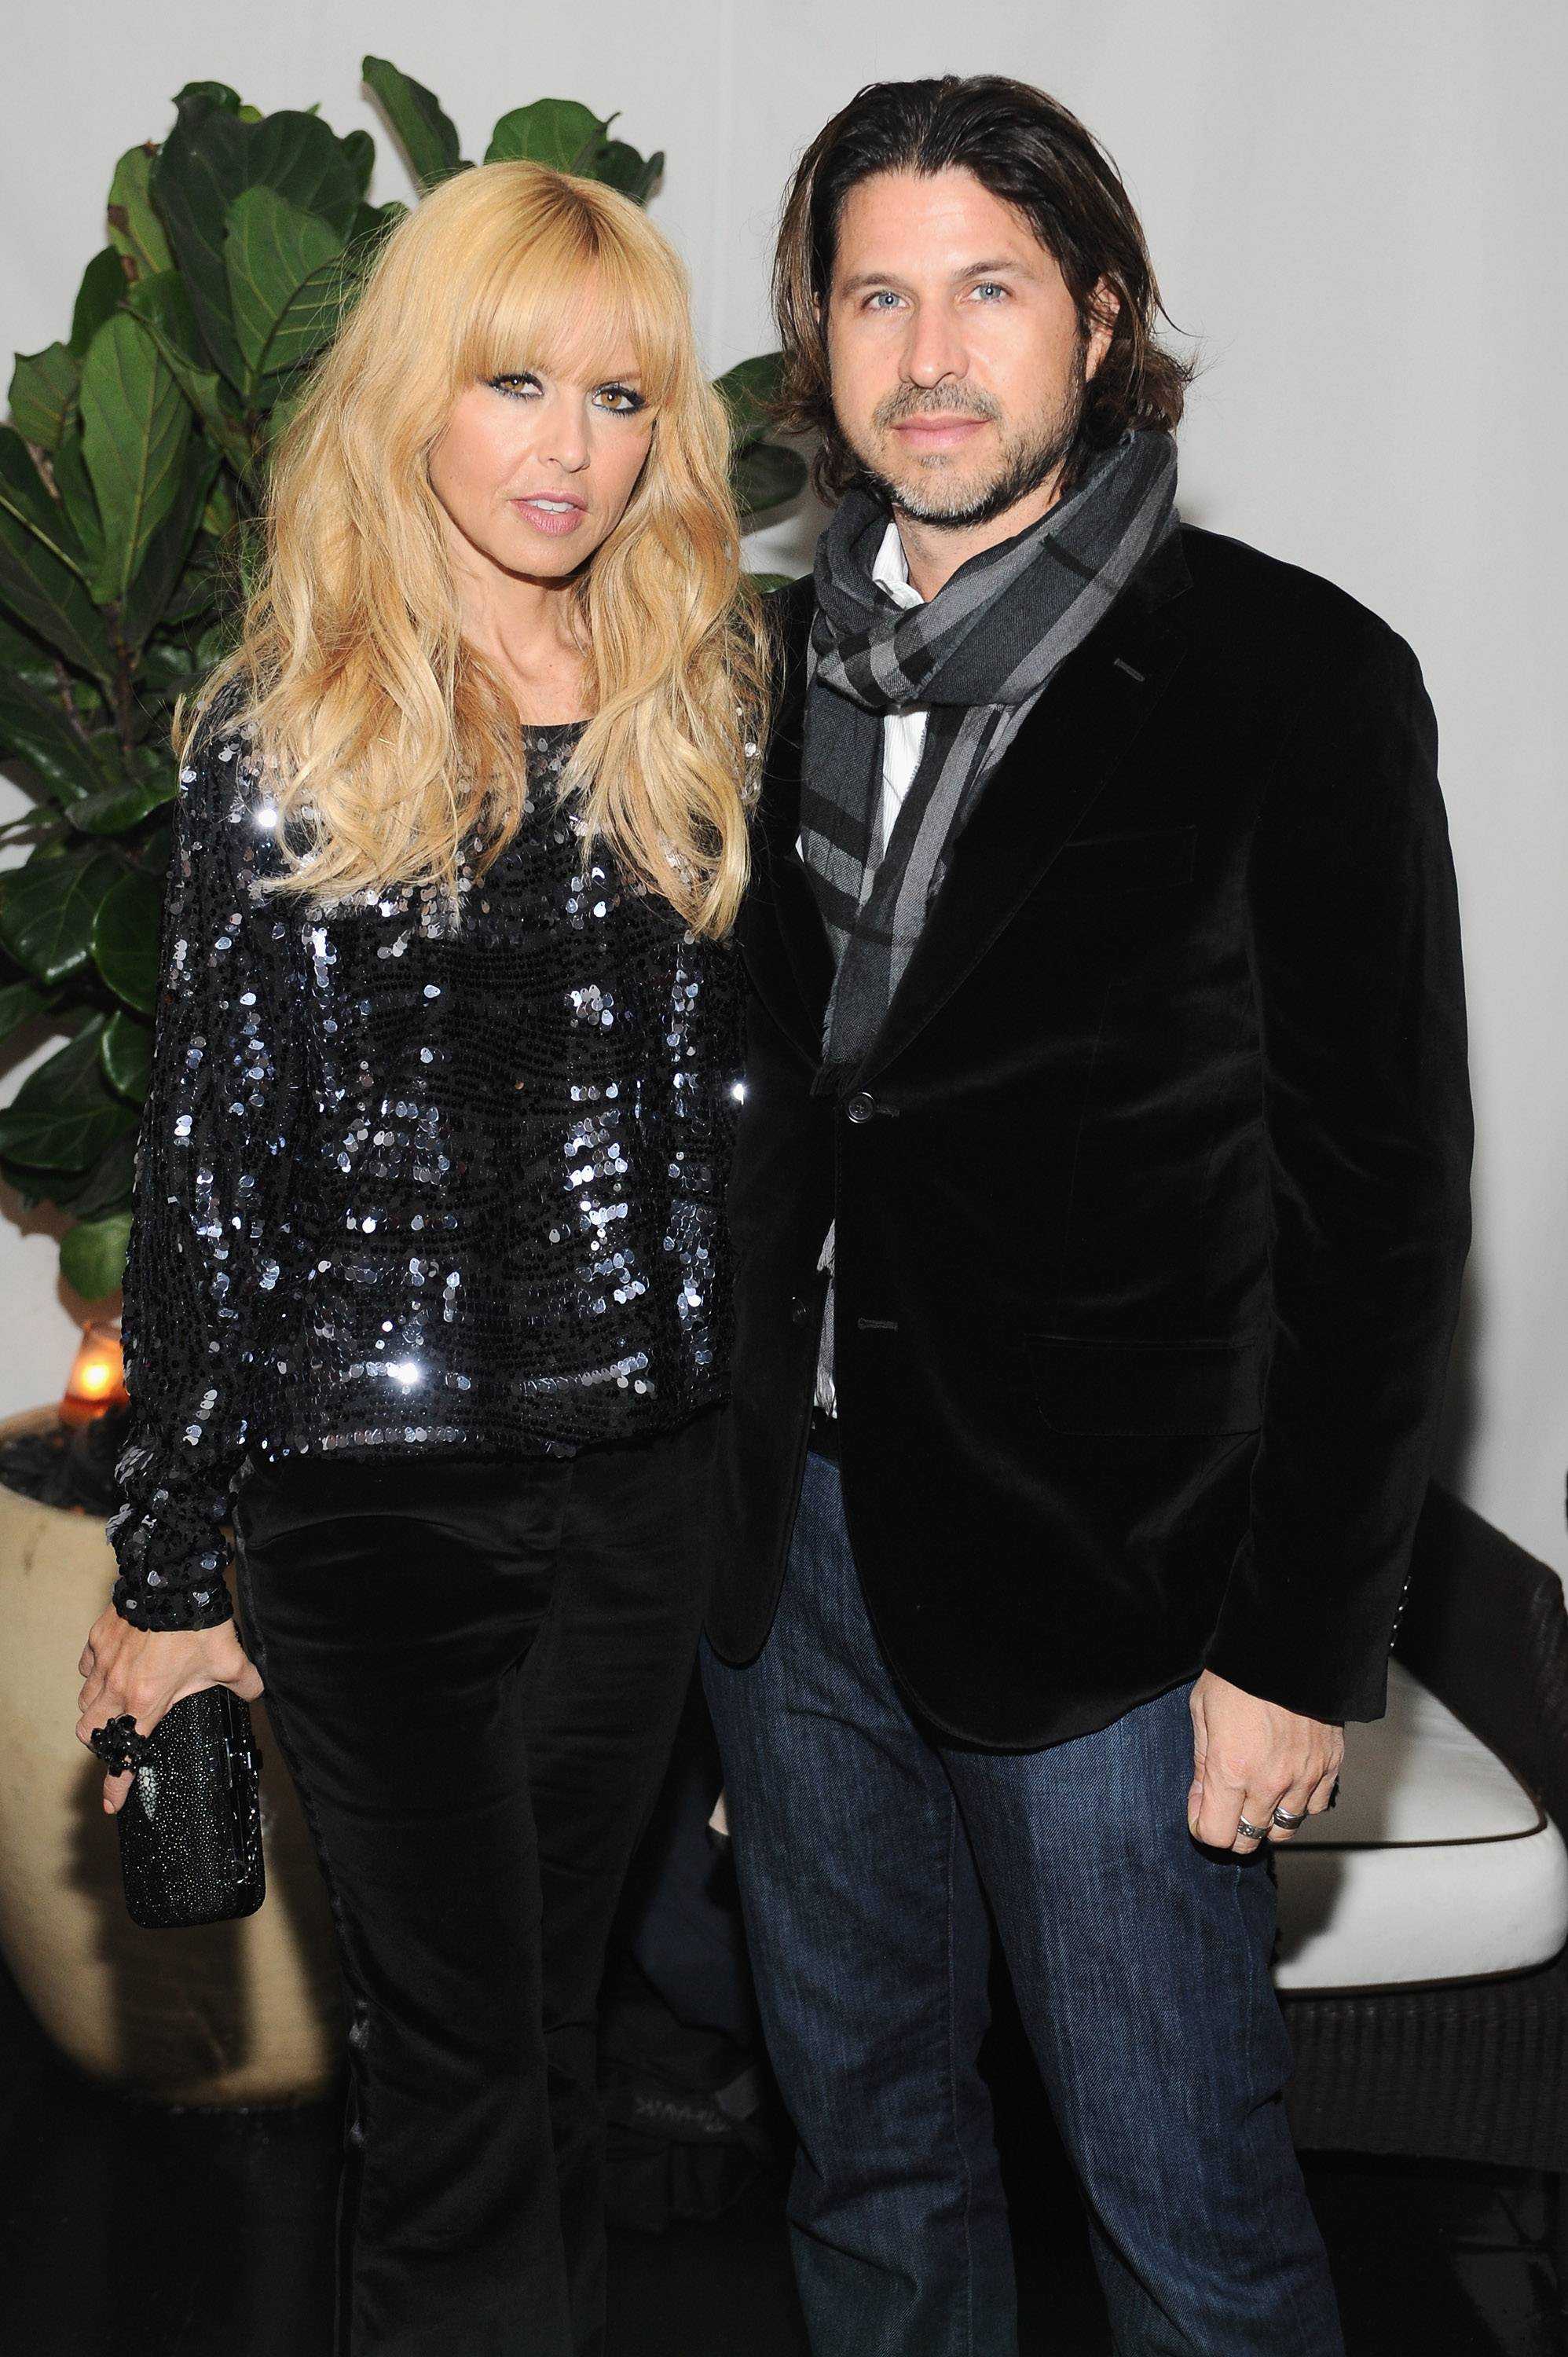 Dom Perignon And W Magazine Celebrate The Golden Globes At Chateau Marmout